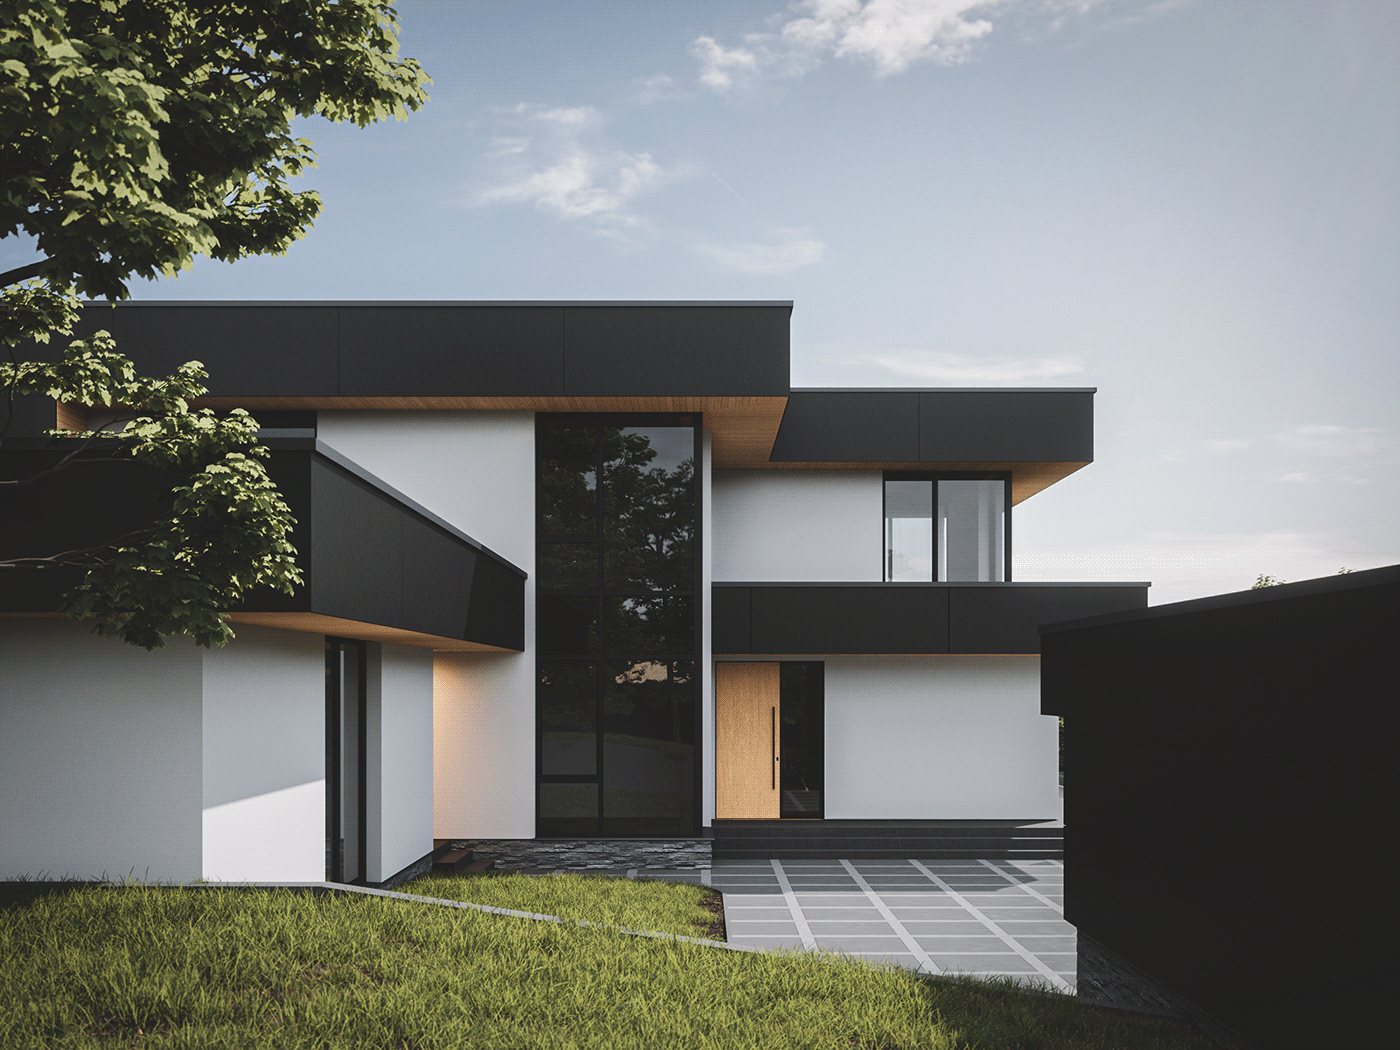 3ds max architecture ForestPack FStorm Render house modern private house Render Tree 